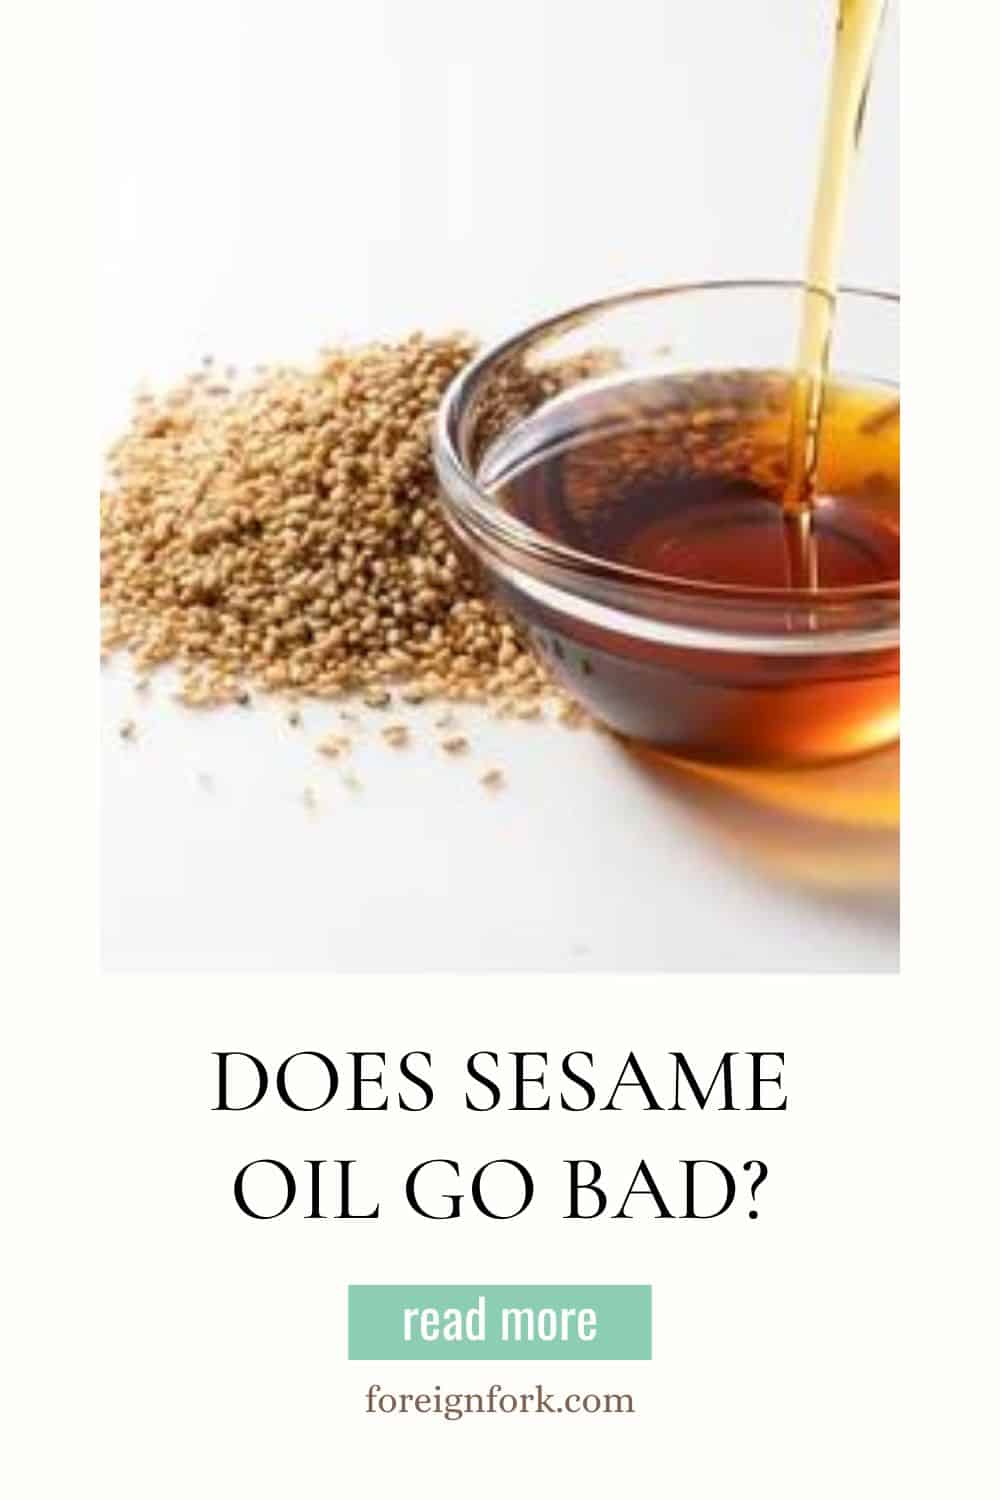 Pinterest image for an article that says "Does Sesame Oil Go Bad" and shows a bowl of sesame oil. 